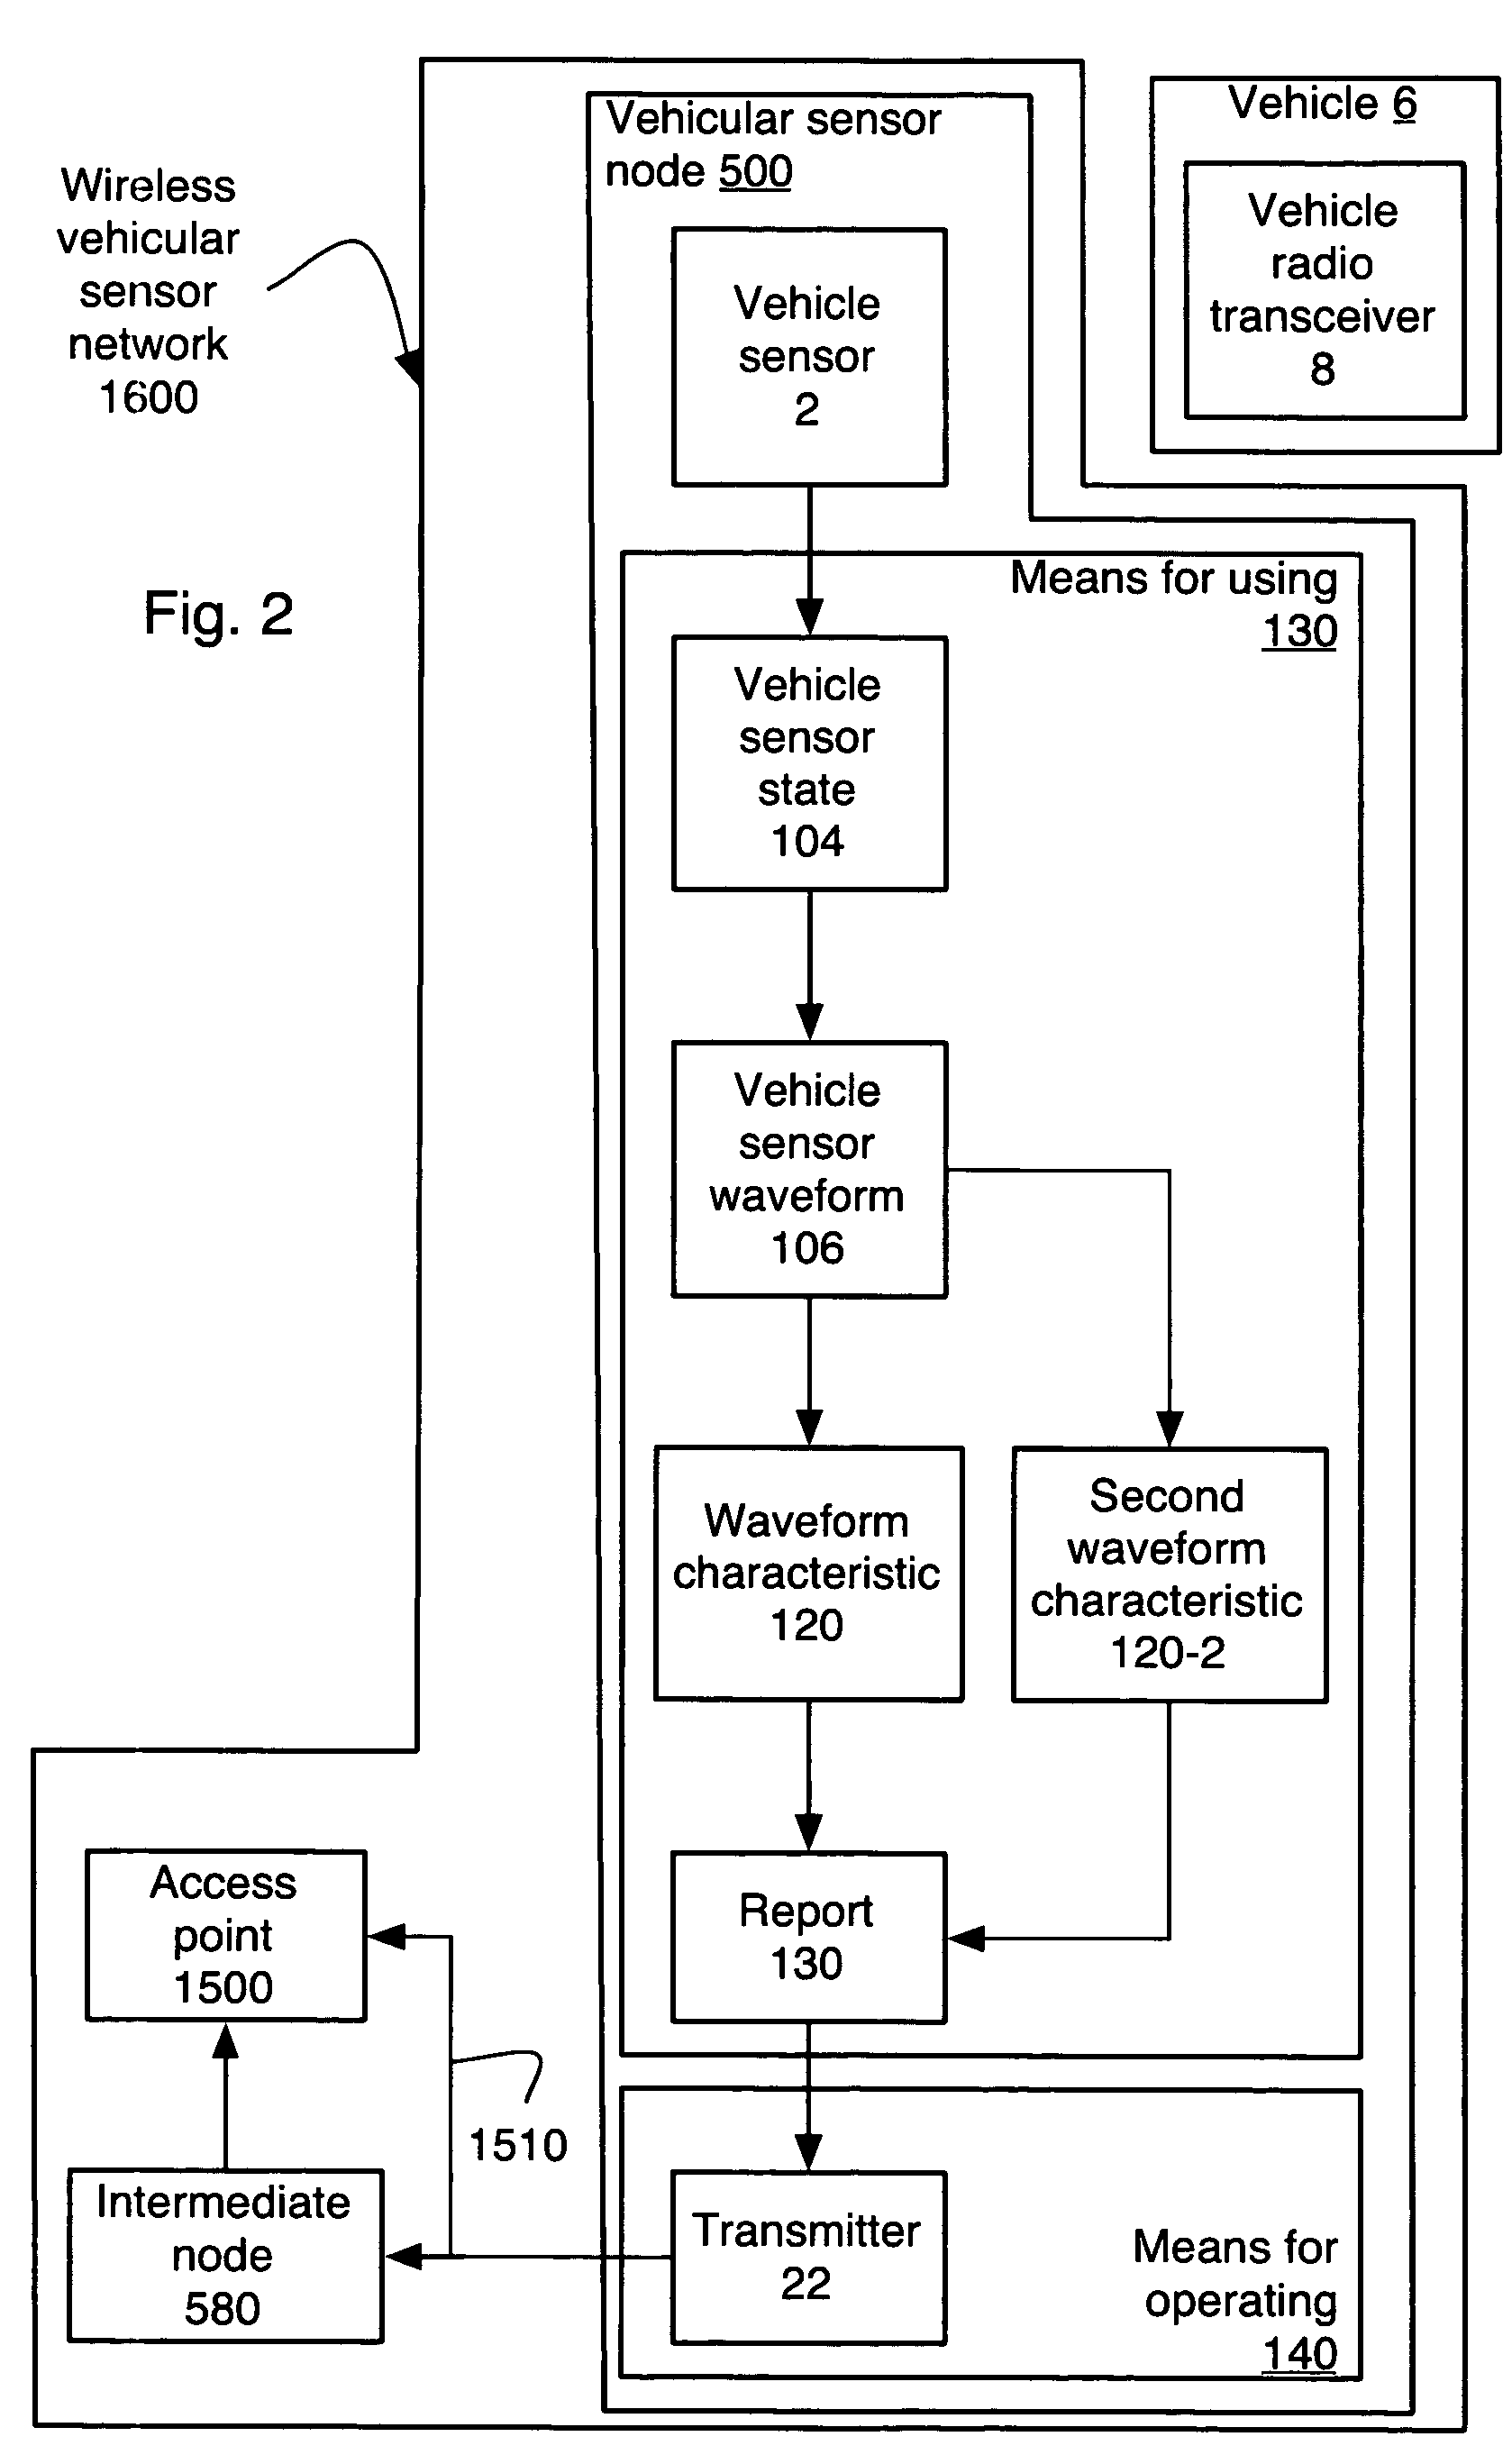 Method and apparatus reporting a vehicular sensor waveform in a wireless vehicular sensor network